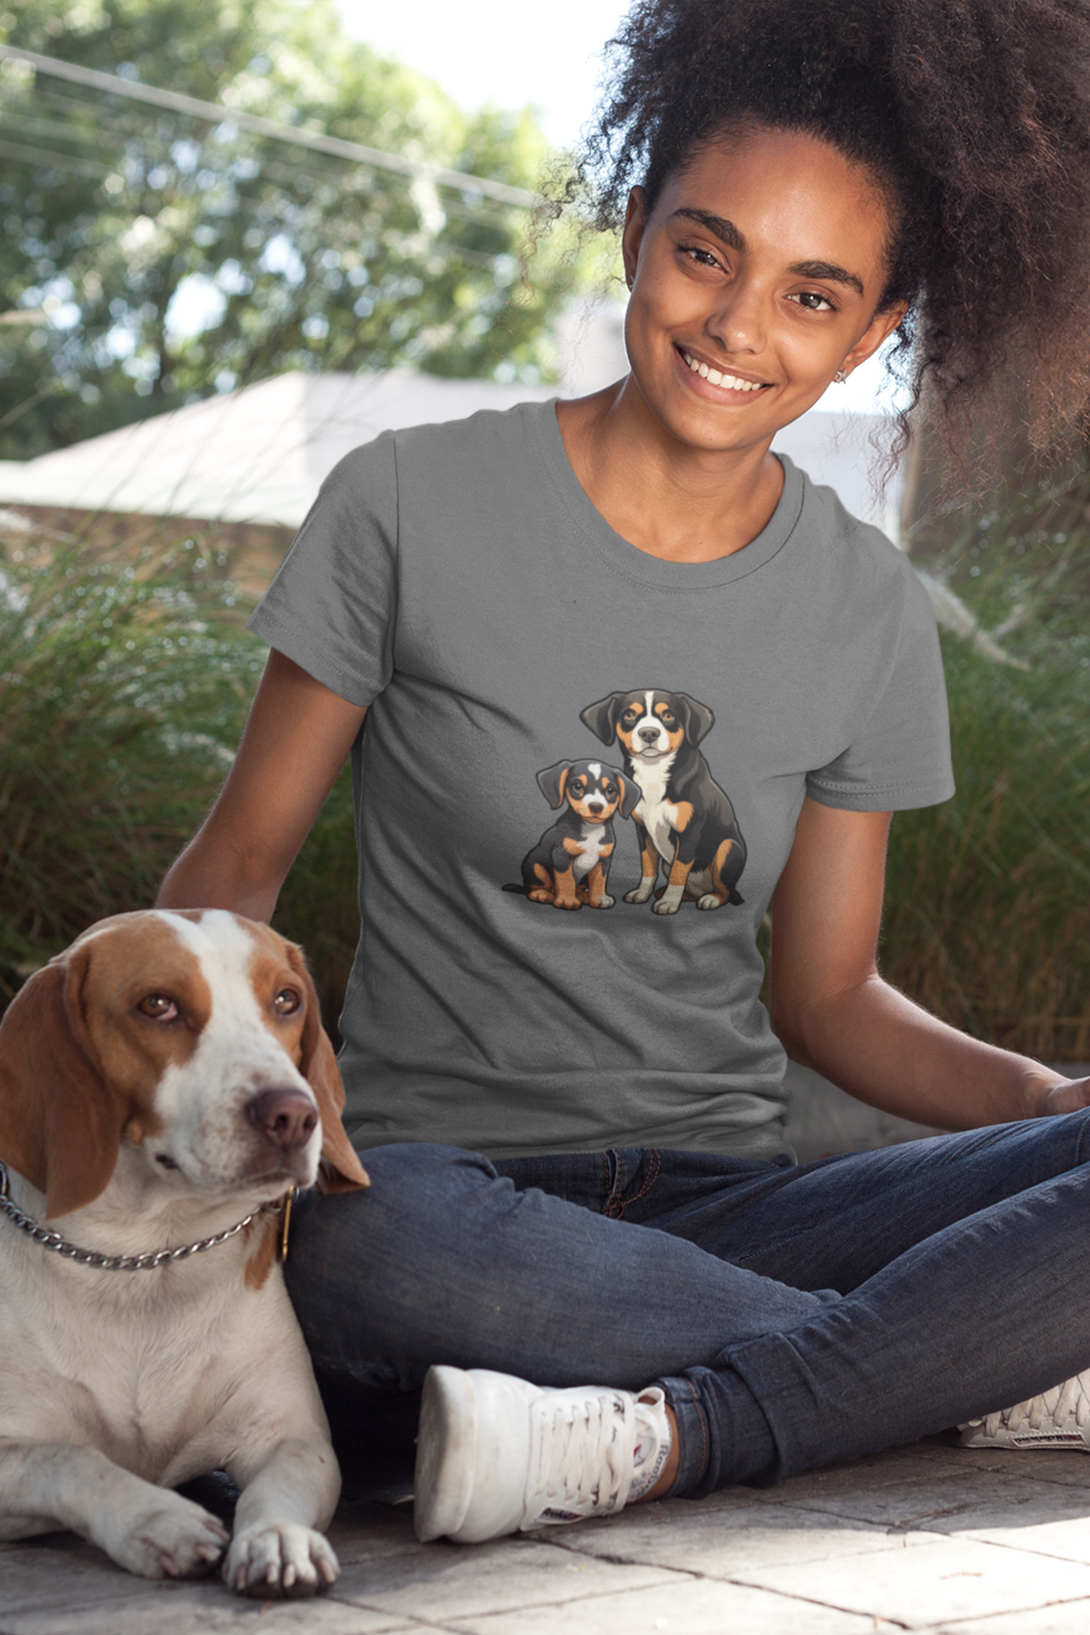 Puppy And Dog Printed T-Shirt For Women - WowWaves - 3